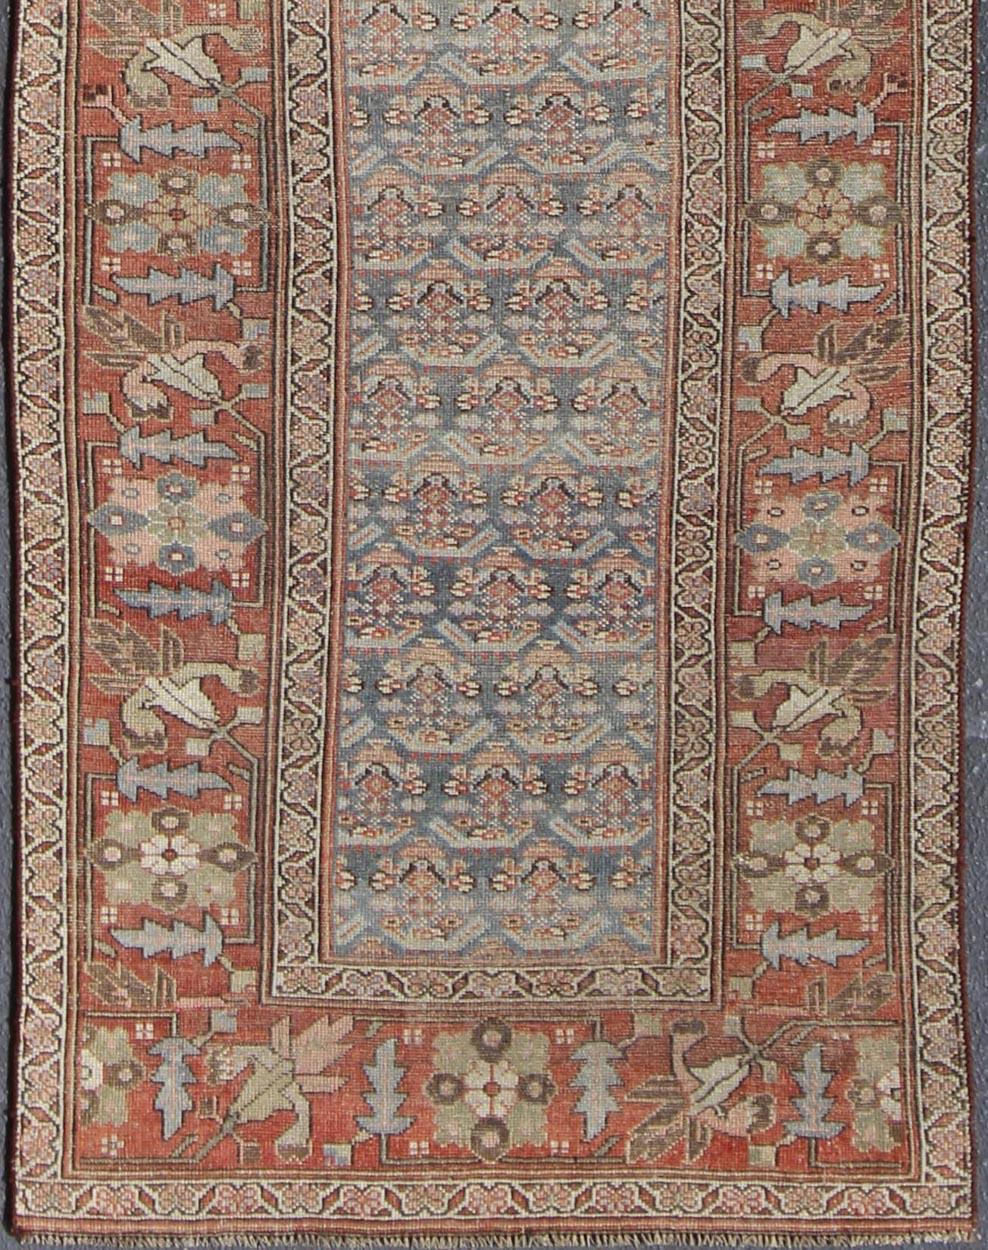 Gray background and soft red-colored Persian Kurdish antique runner in Tribal design with geometric motifs, rug 19-0105, country of origin / type: Iran / Kurdish, circa 1900.

This antique Kurdish tribal rug was woven by Kurdish weavers in western